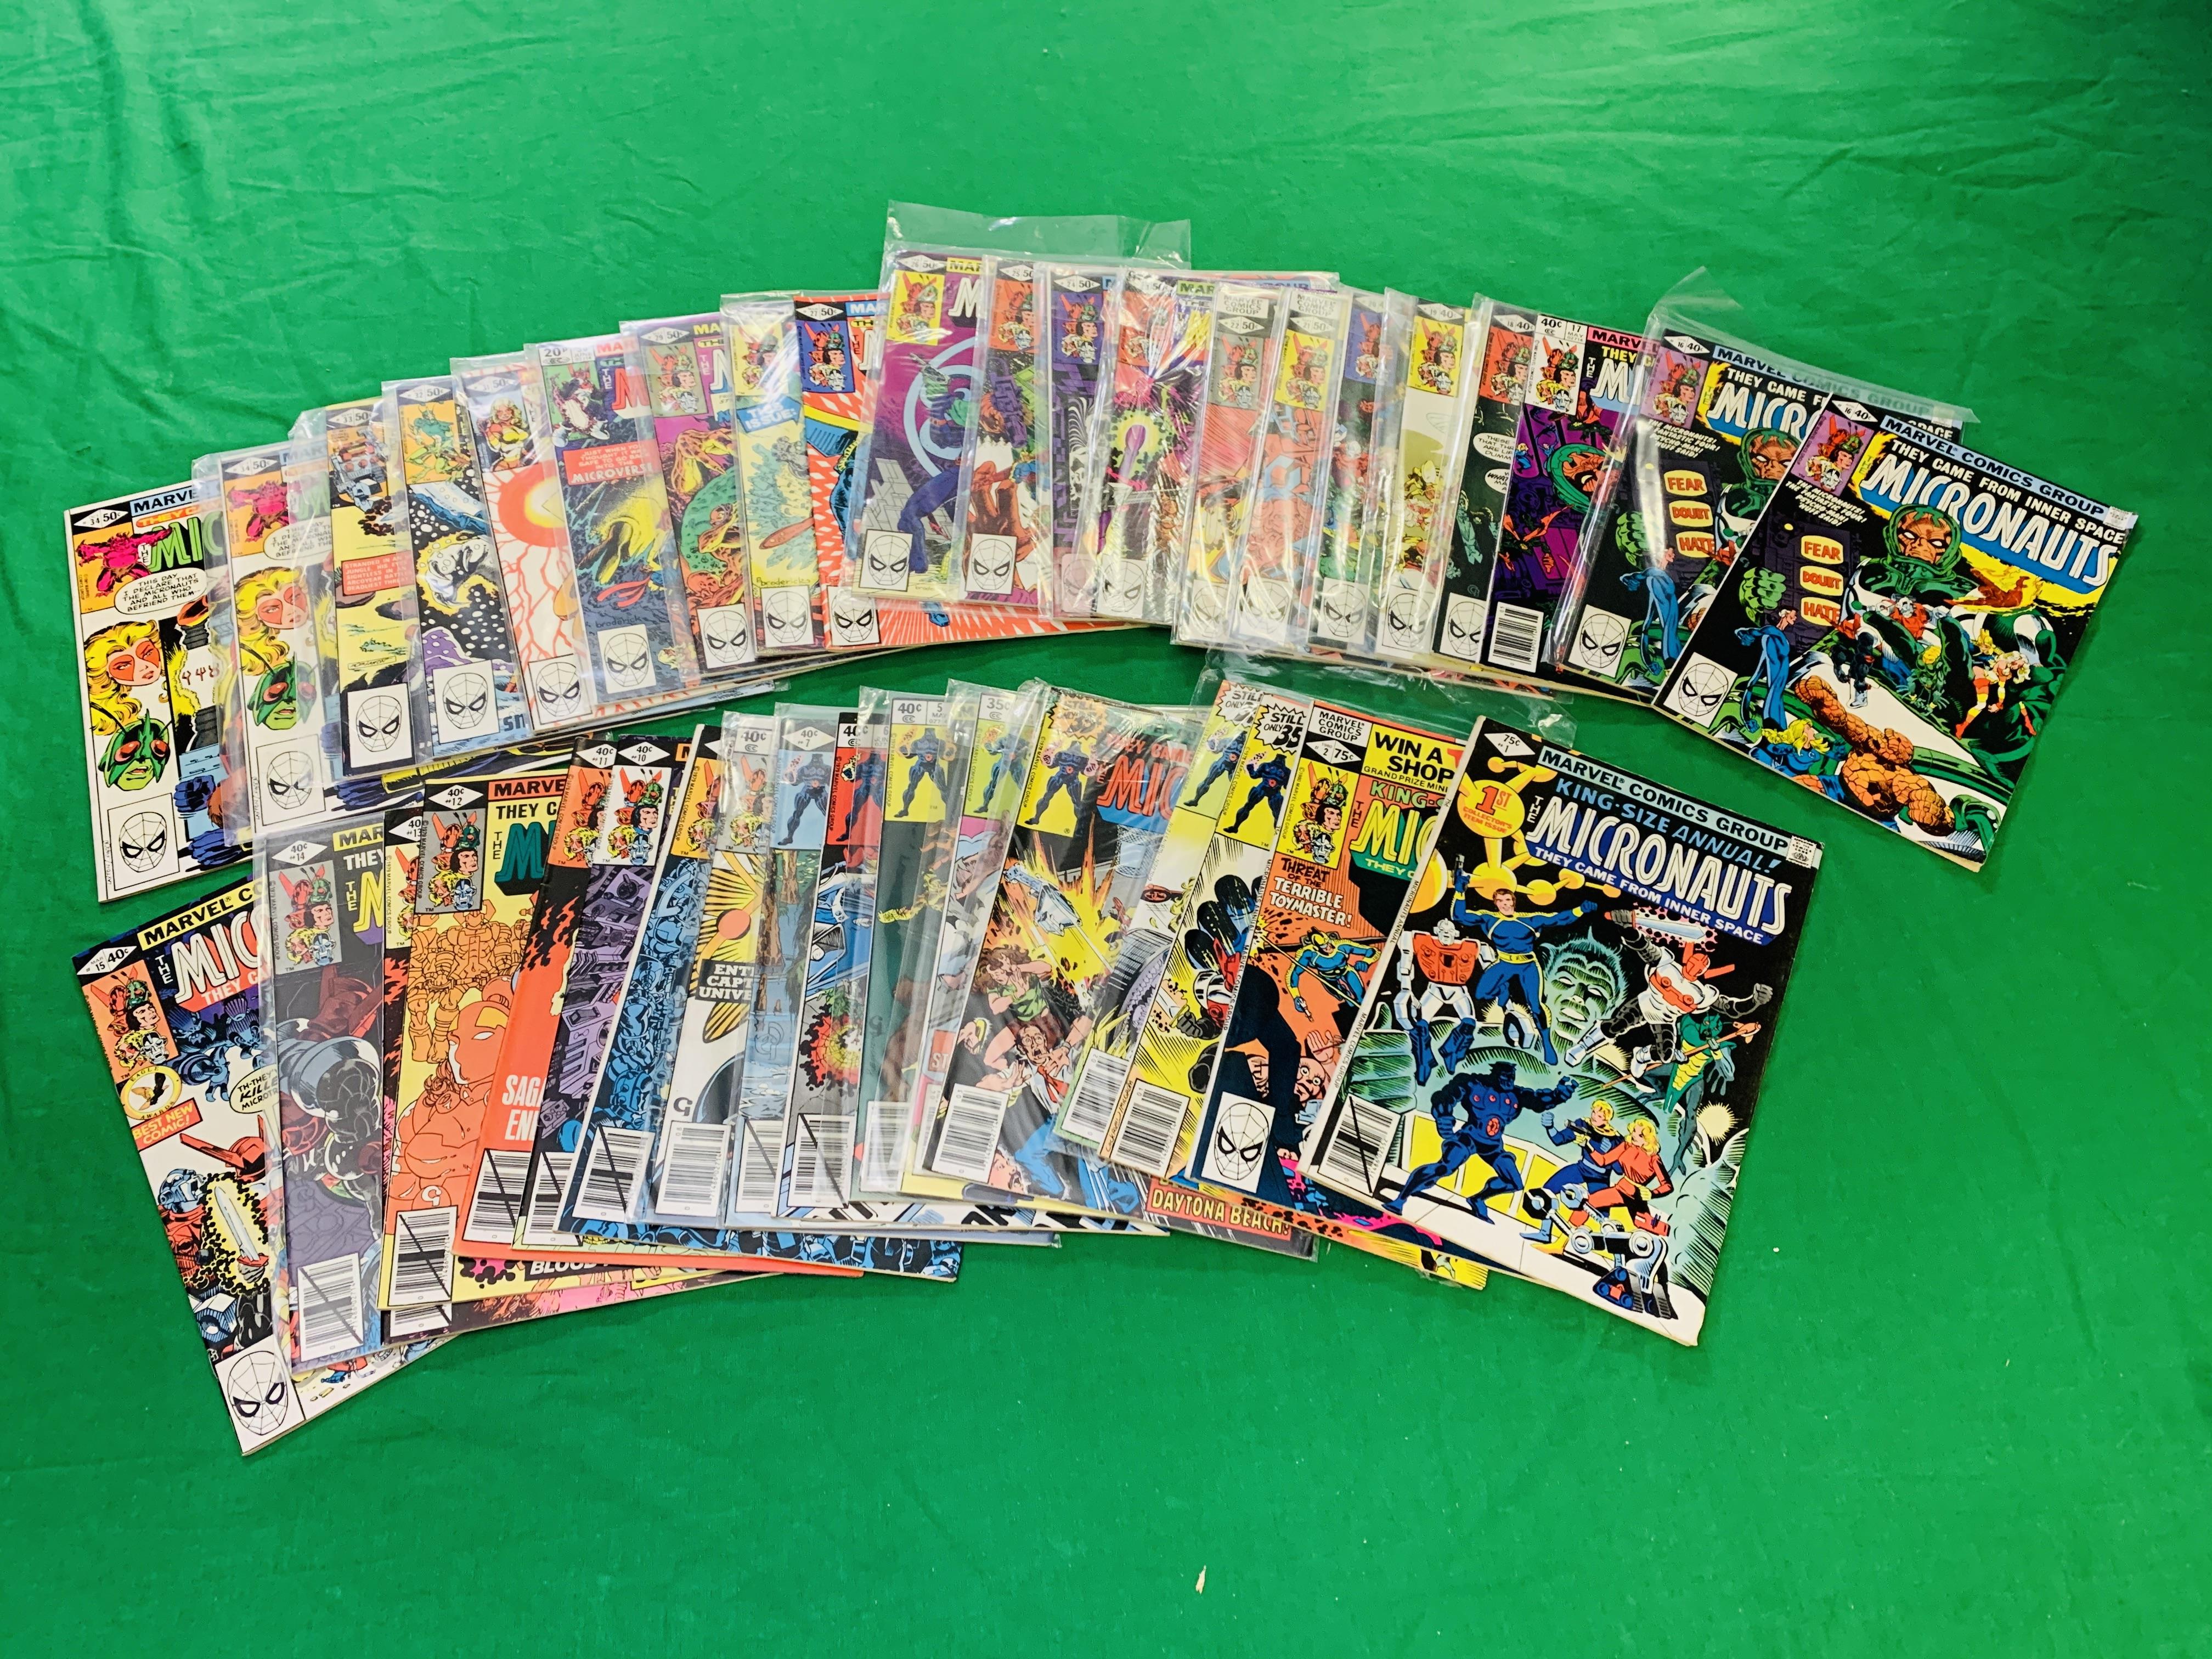 MARVEL COMICS THE MICRONAUTS NO. 1 - 59 FROM 1979. NO. 18 - 19, 21, 37, 53, 57 HAVE RUSTY STAPLES.